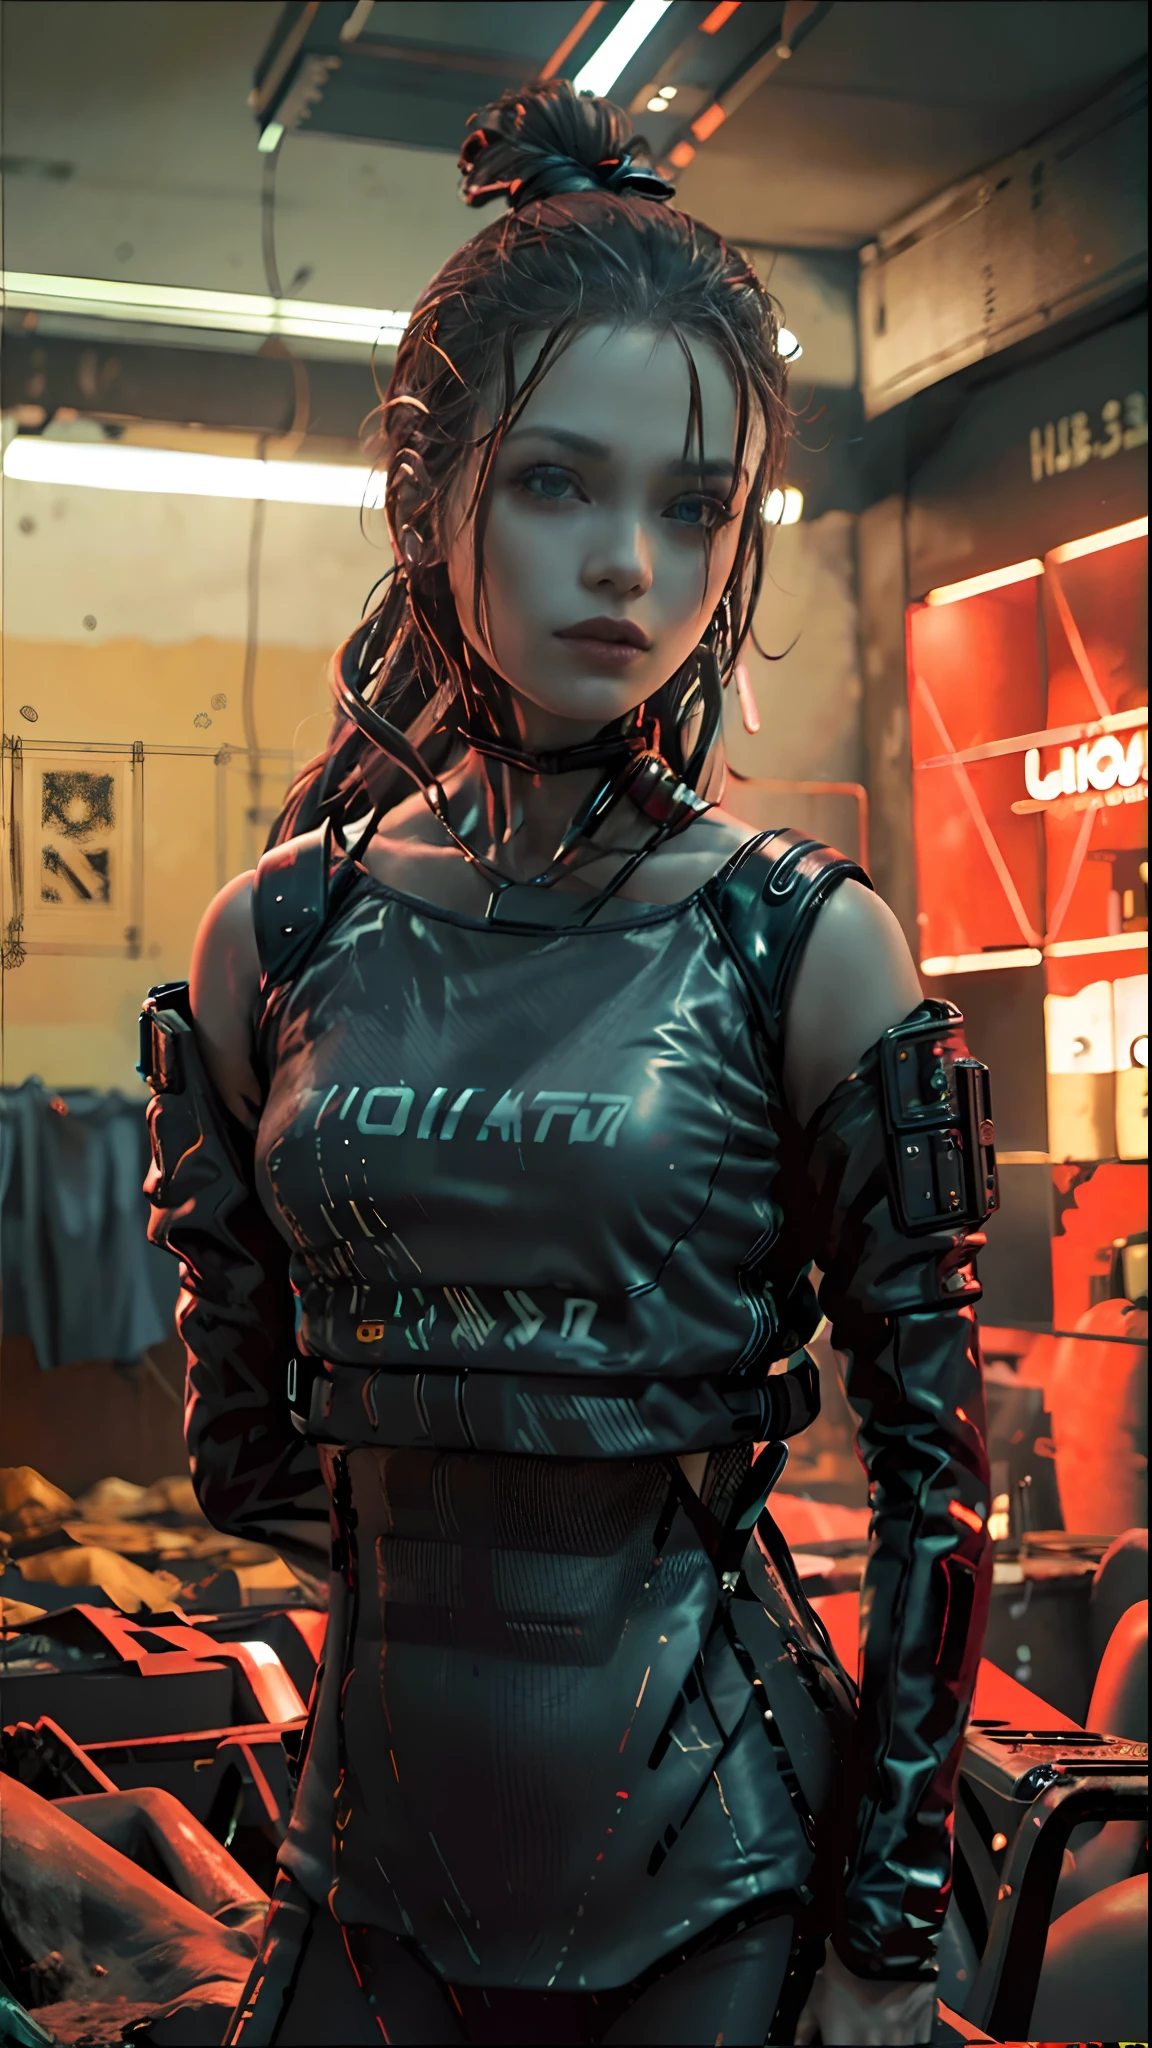 realistic photo, cinemactic, high quality, Cyberpunk girl sitting in front of a computer, in an abandoned room with cables and pipes, an industrial wall fan, a window with a cyberpunk city, dark environment, matrix style, blade runner style, cluttered room, computers and servers, cables and pipes, industrial environment, fog.